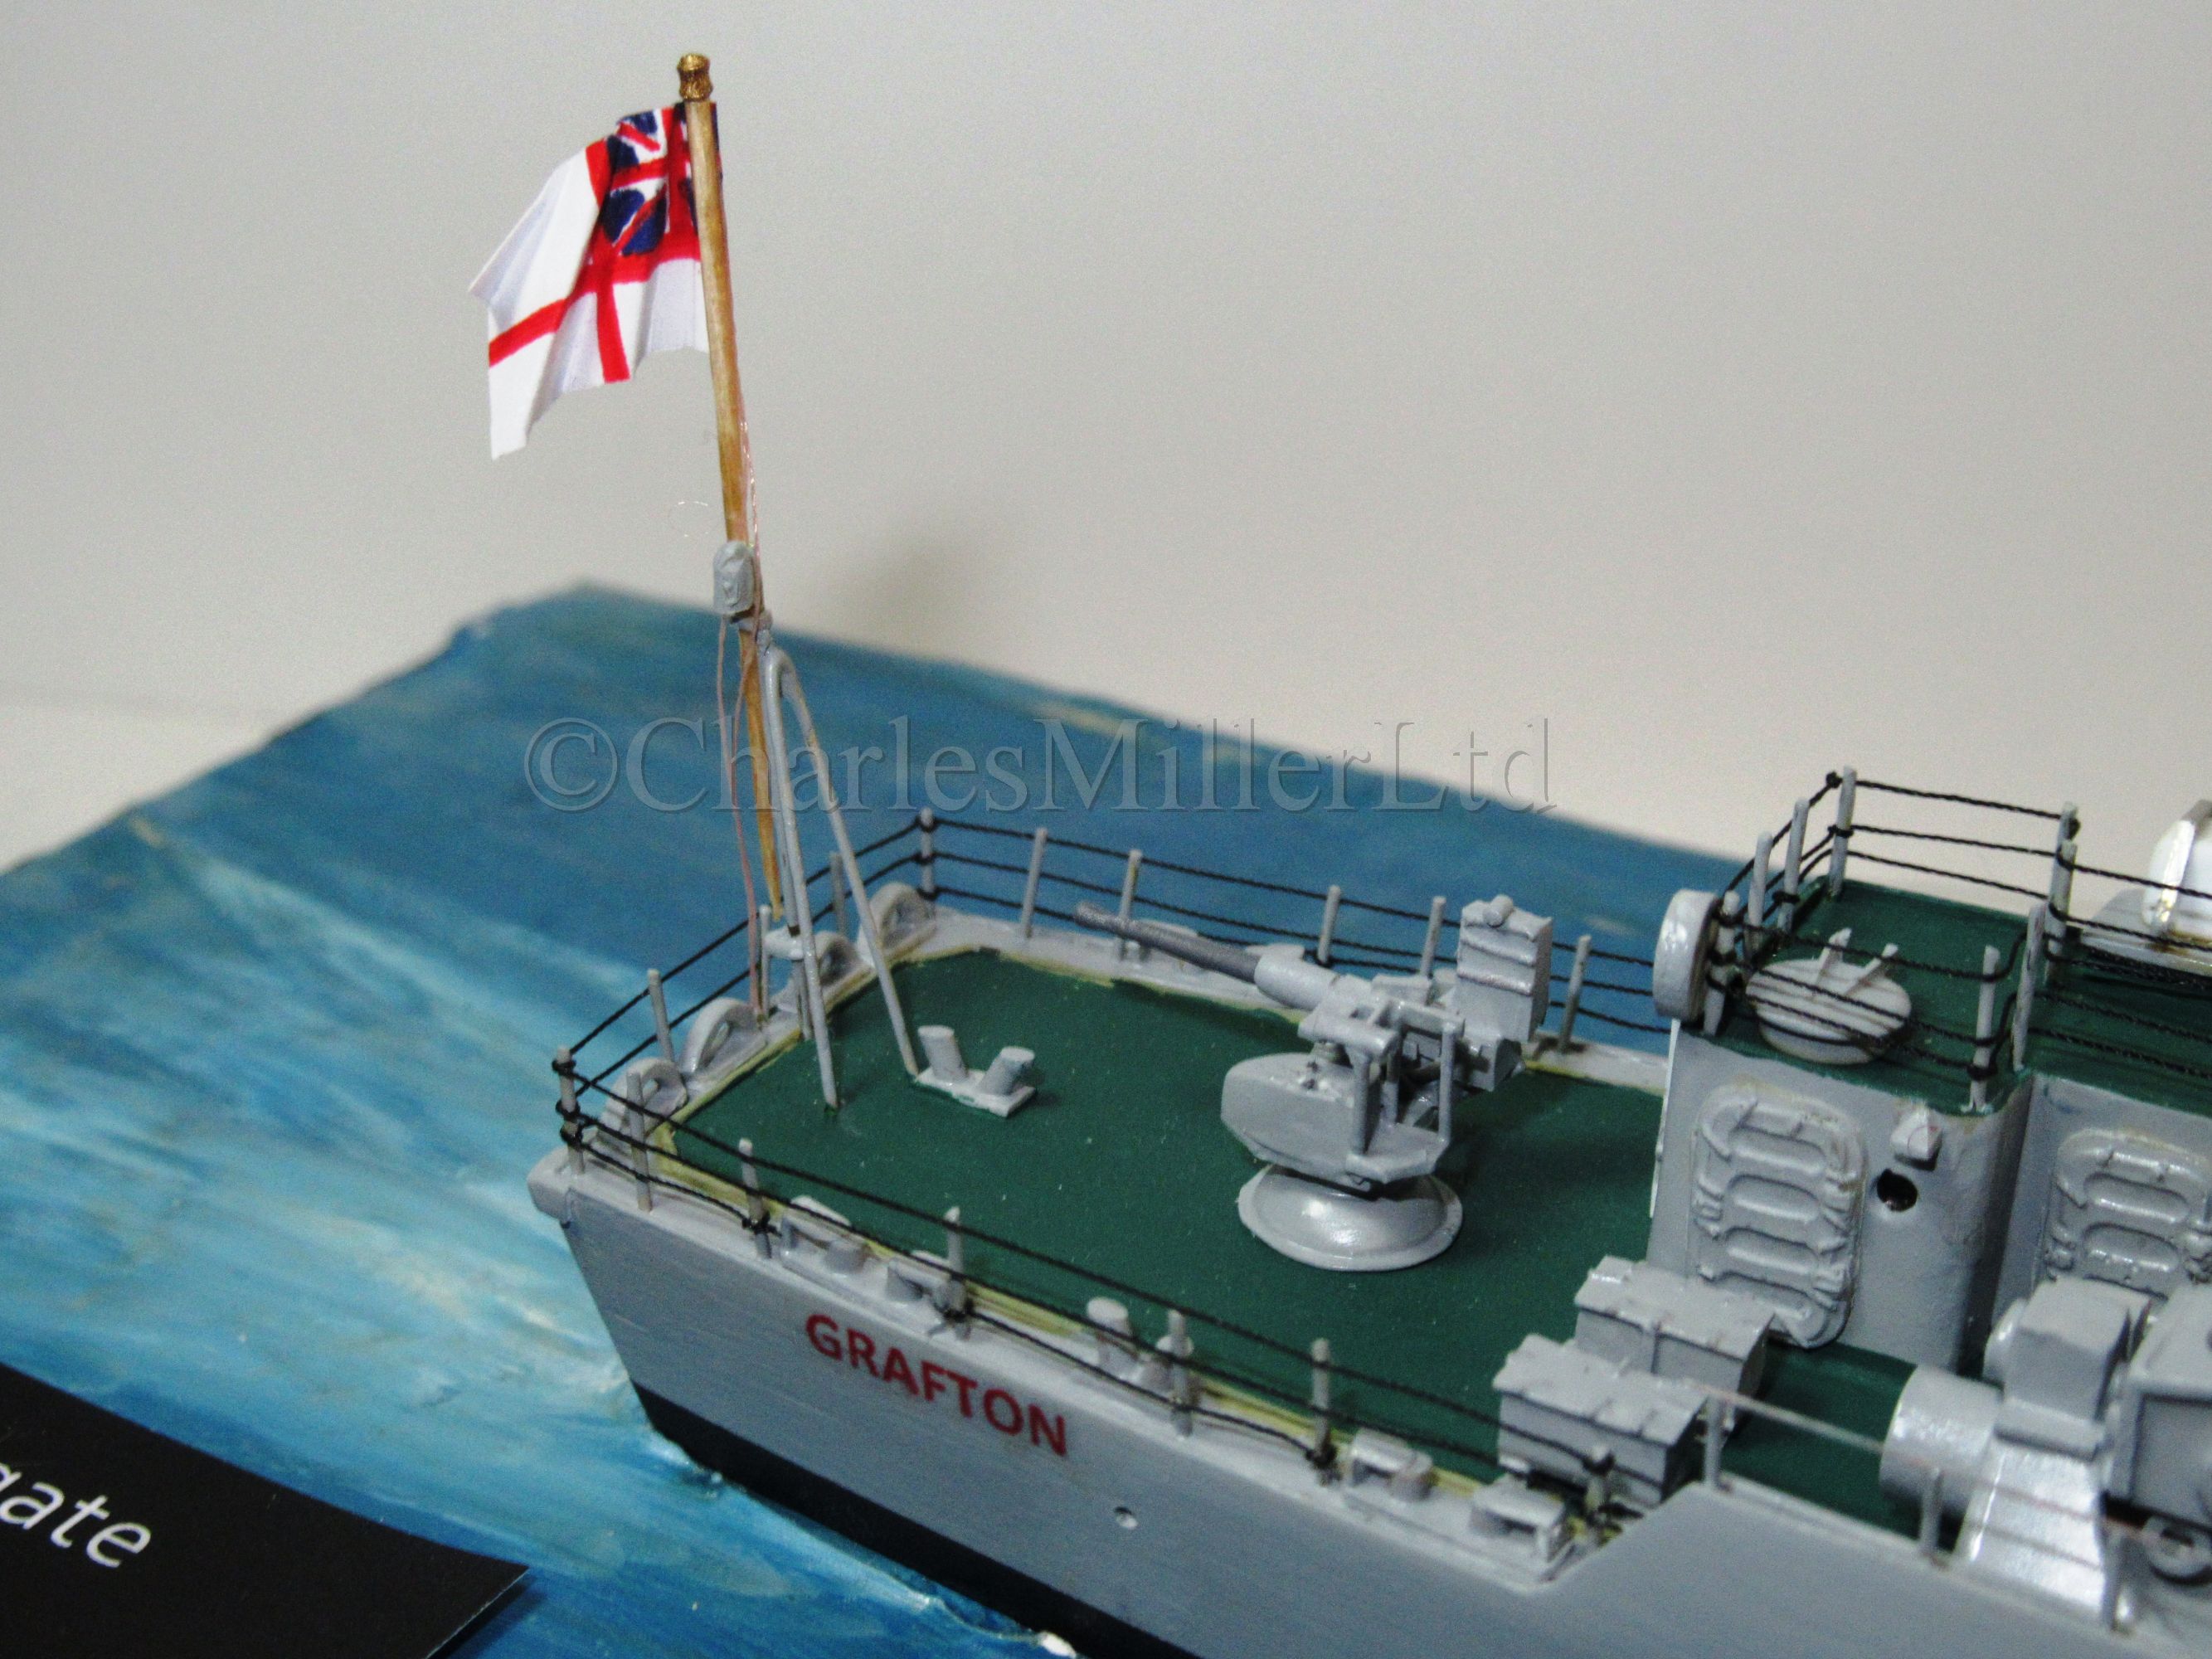 A 1:192 WATERLINE MODEL FOR THE TYPE 14 BLACKWOOD CLASS FRIGATE HMS GRAFTON (F51), AS FITTED IN - Image 7 of 14